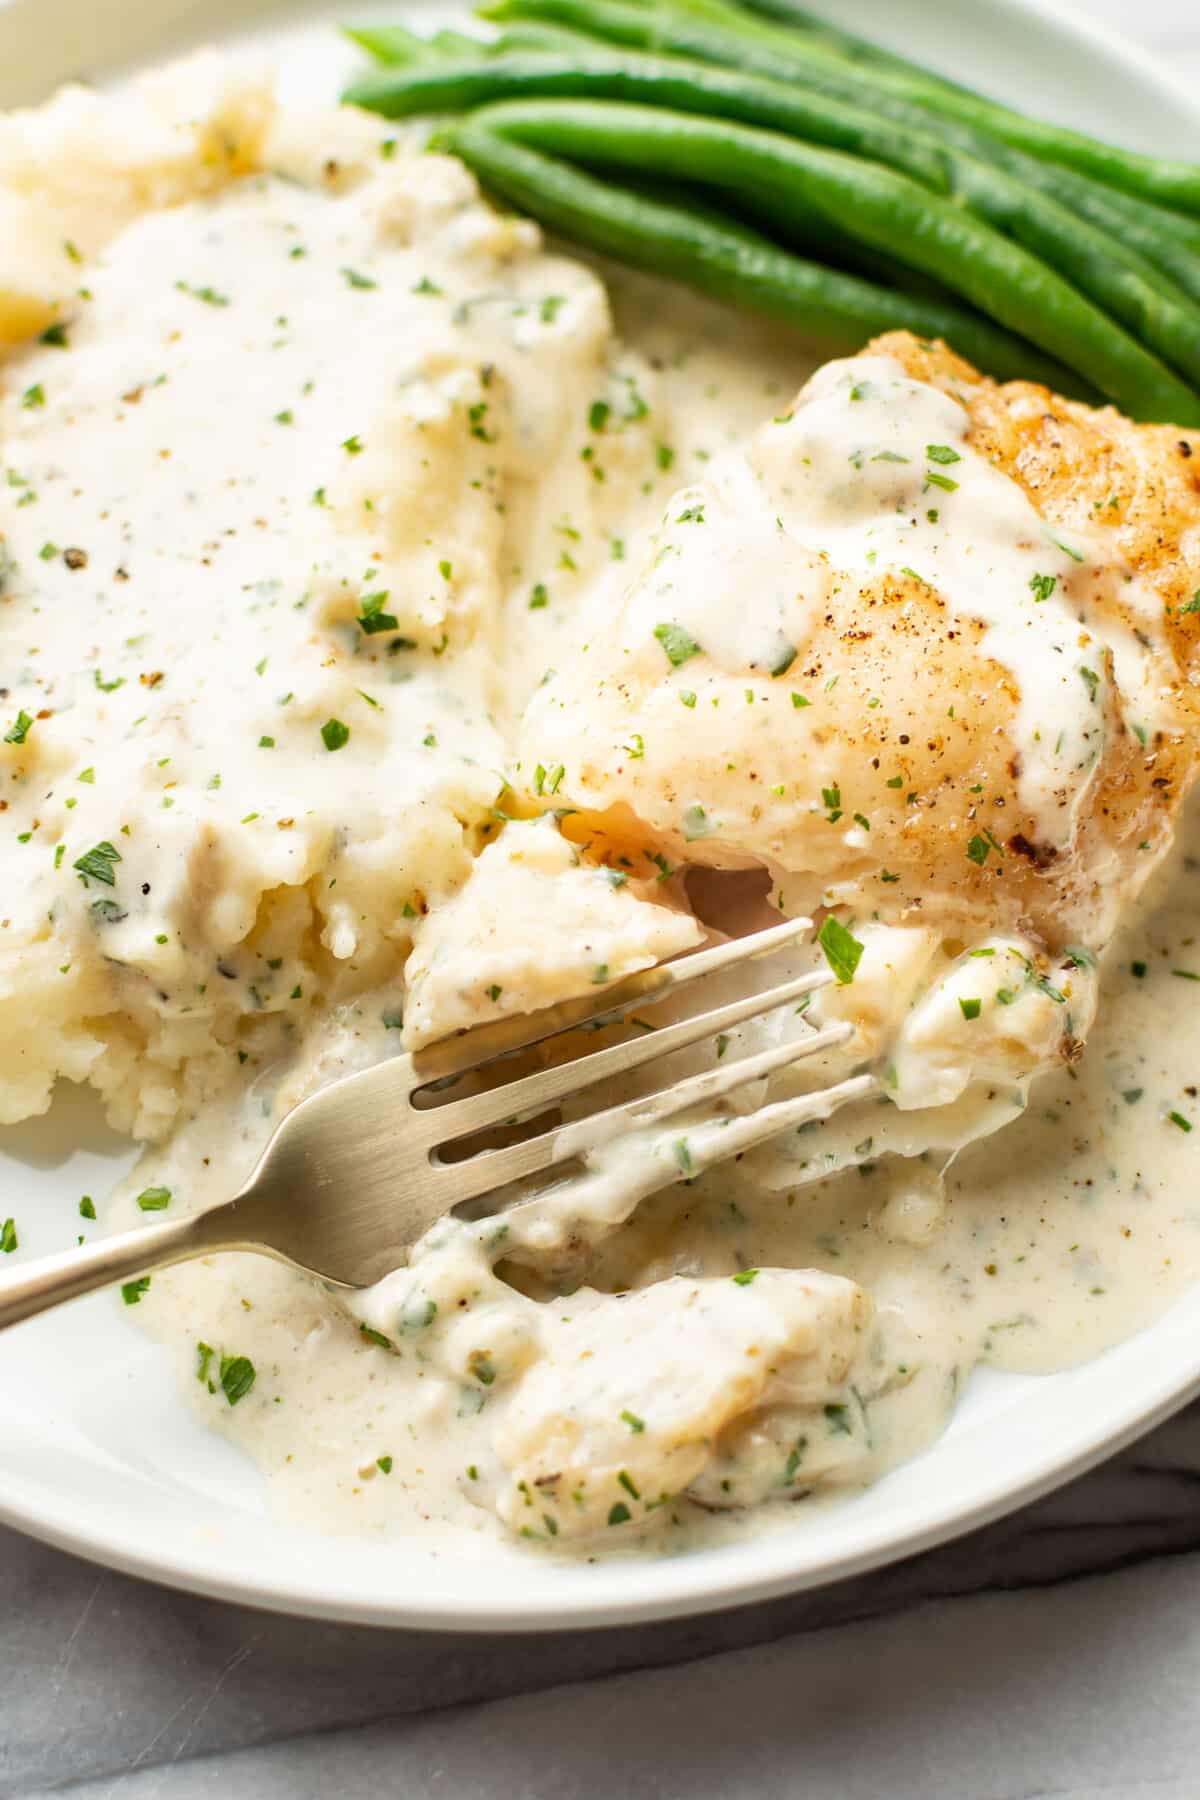 a plate with creamy lemon parmesan cod, mashed potatoes, and green beans